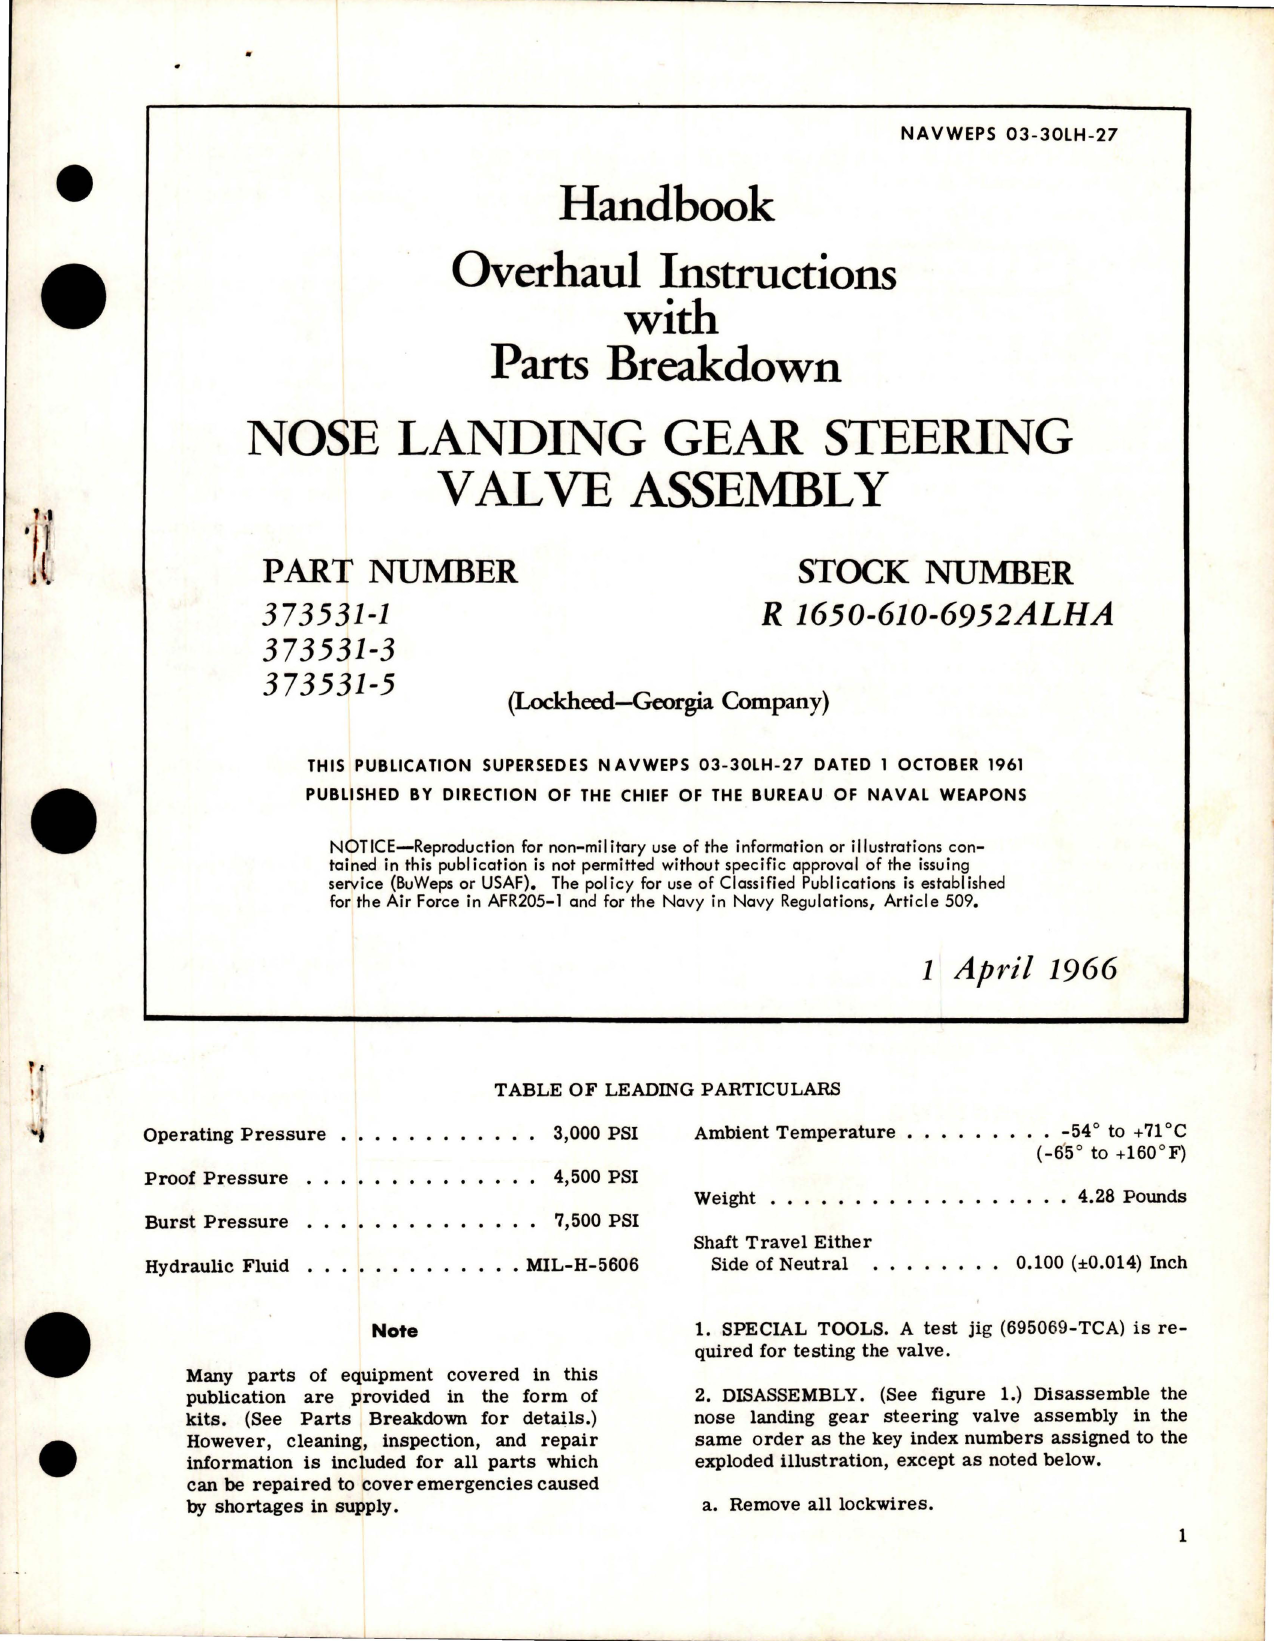 Sample page 1 from AirCorps Library document: Overhaul Instructions with Parts Breakdown for Nose Landing Gear Steering Valve Assembly 